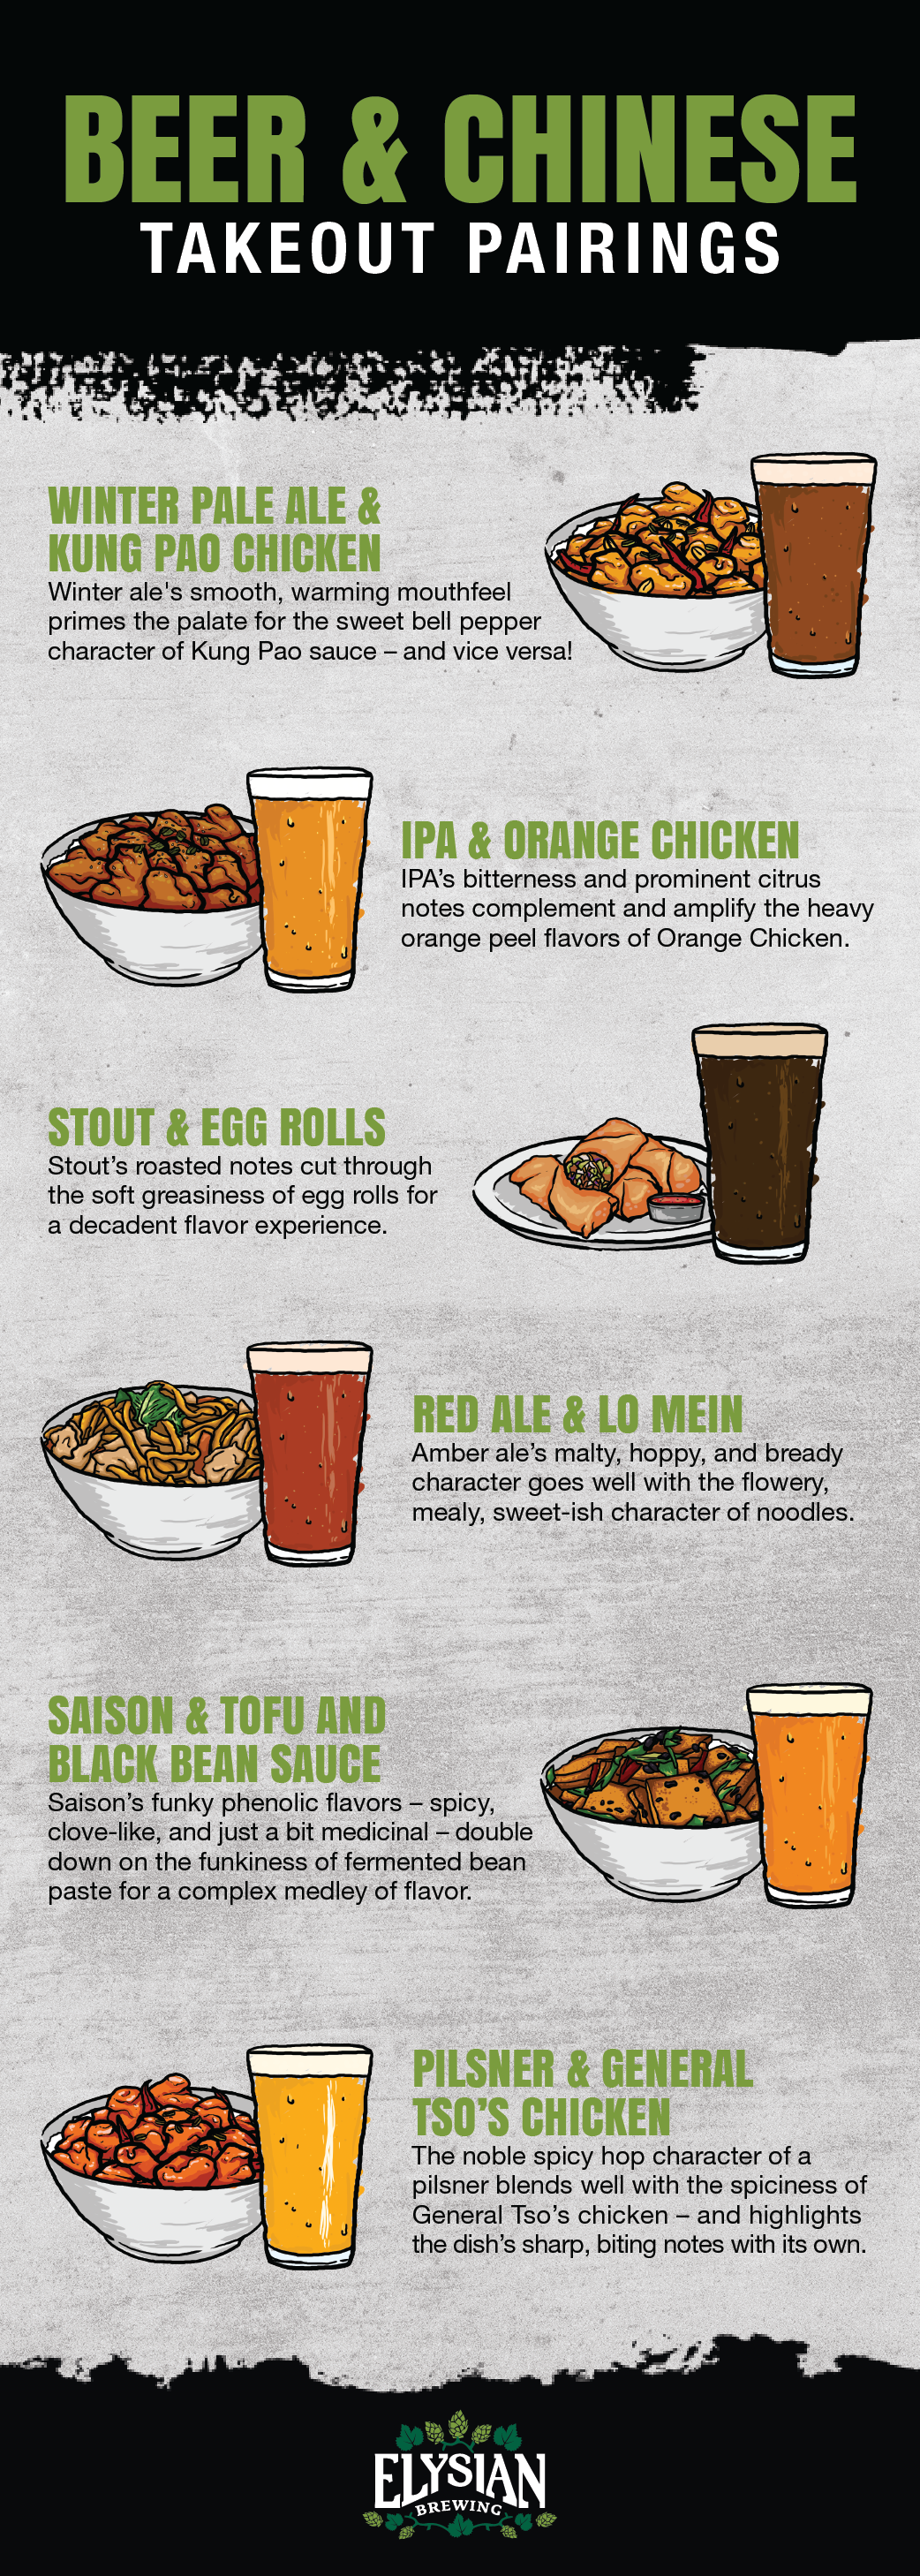 How To Pair Beer With Chinese Food [Infographic]